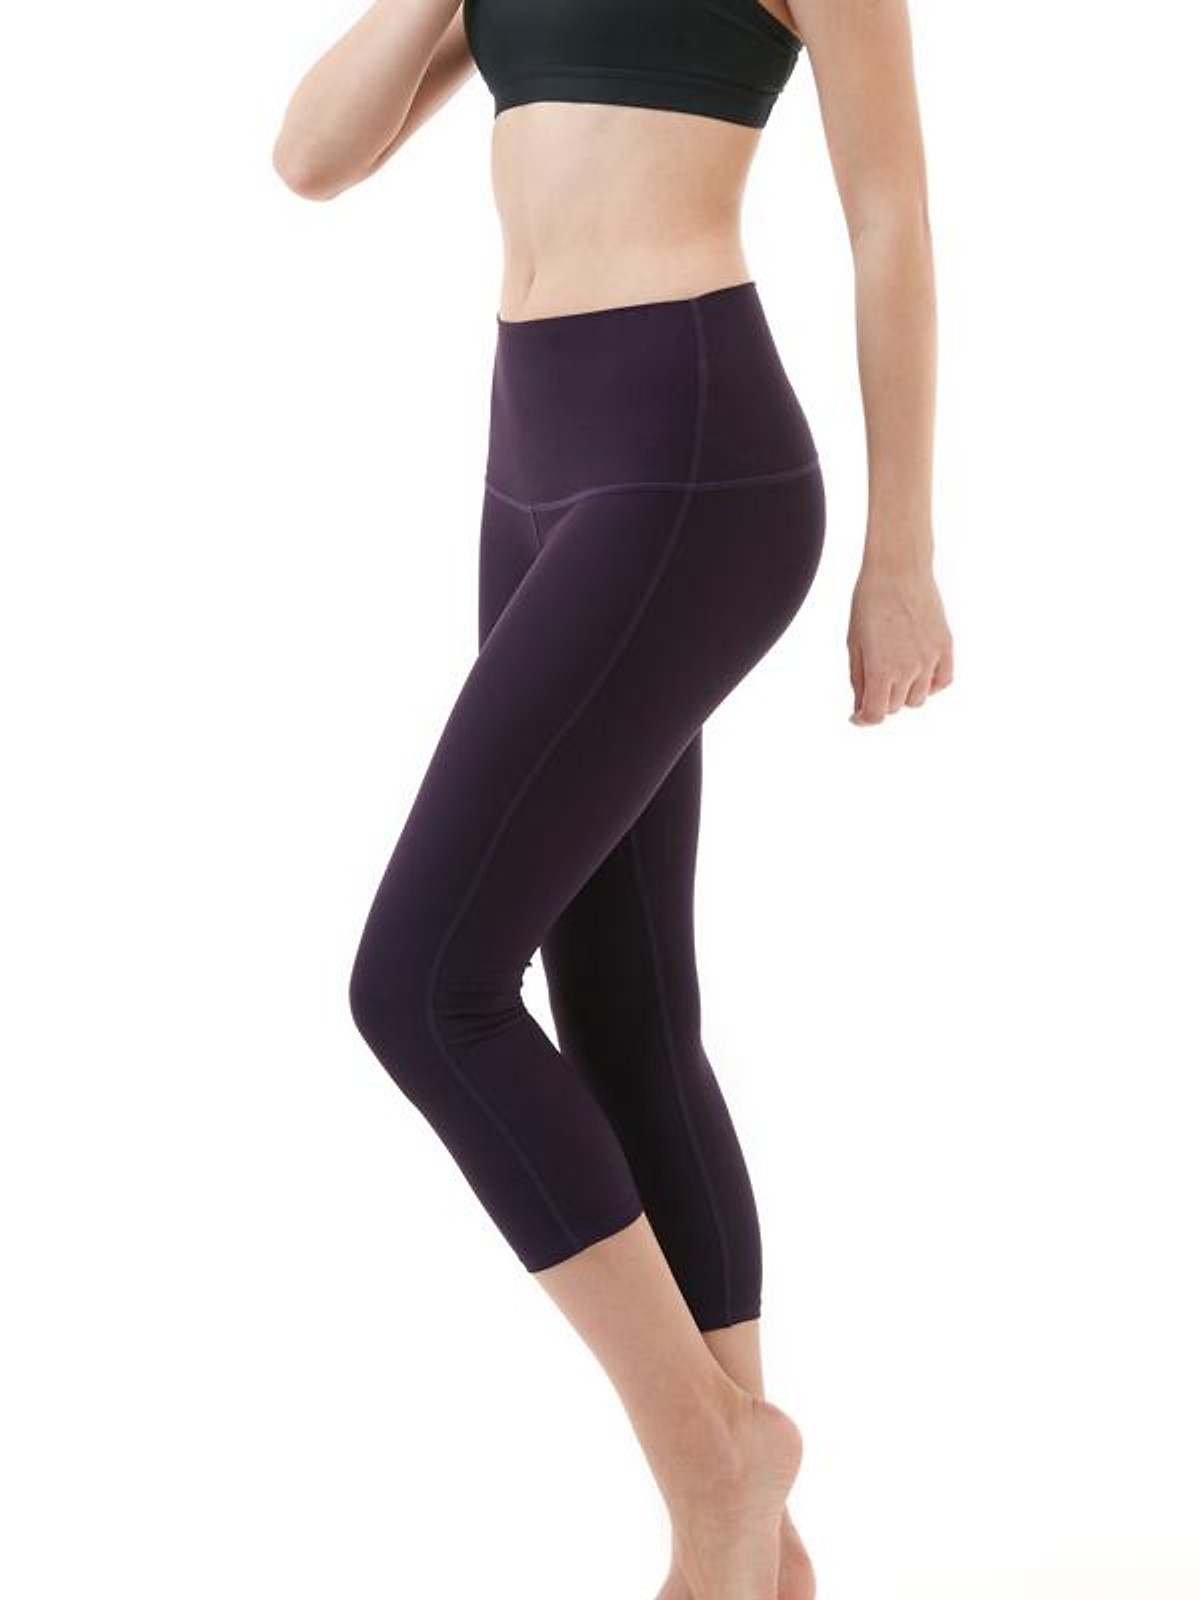 ✓ American-made Women's 3/4 Cuffed Capri Yoga Pants (Solid Black) buy  online for the price $66.95 at Yoga-Eco-Clothing.com